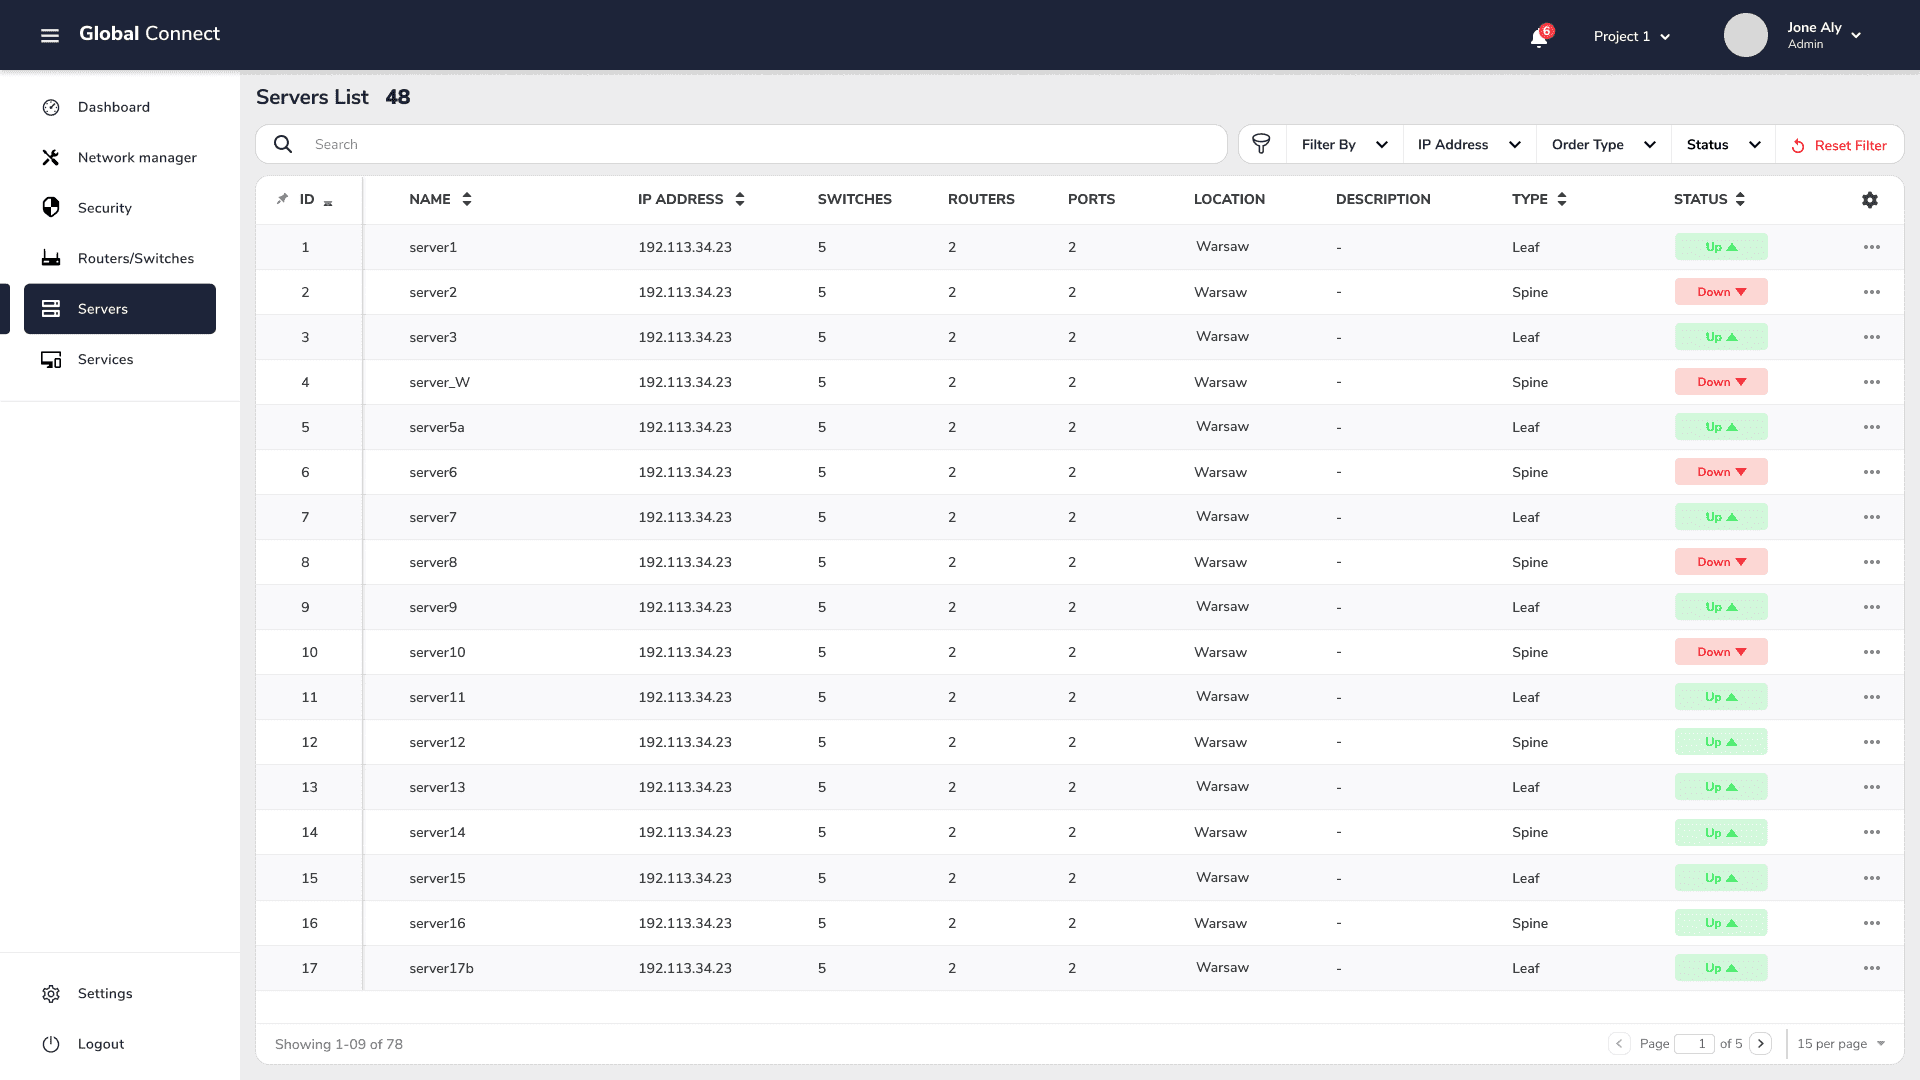 Final product - view of data tables UX and UI design